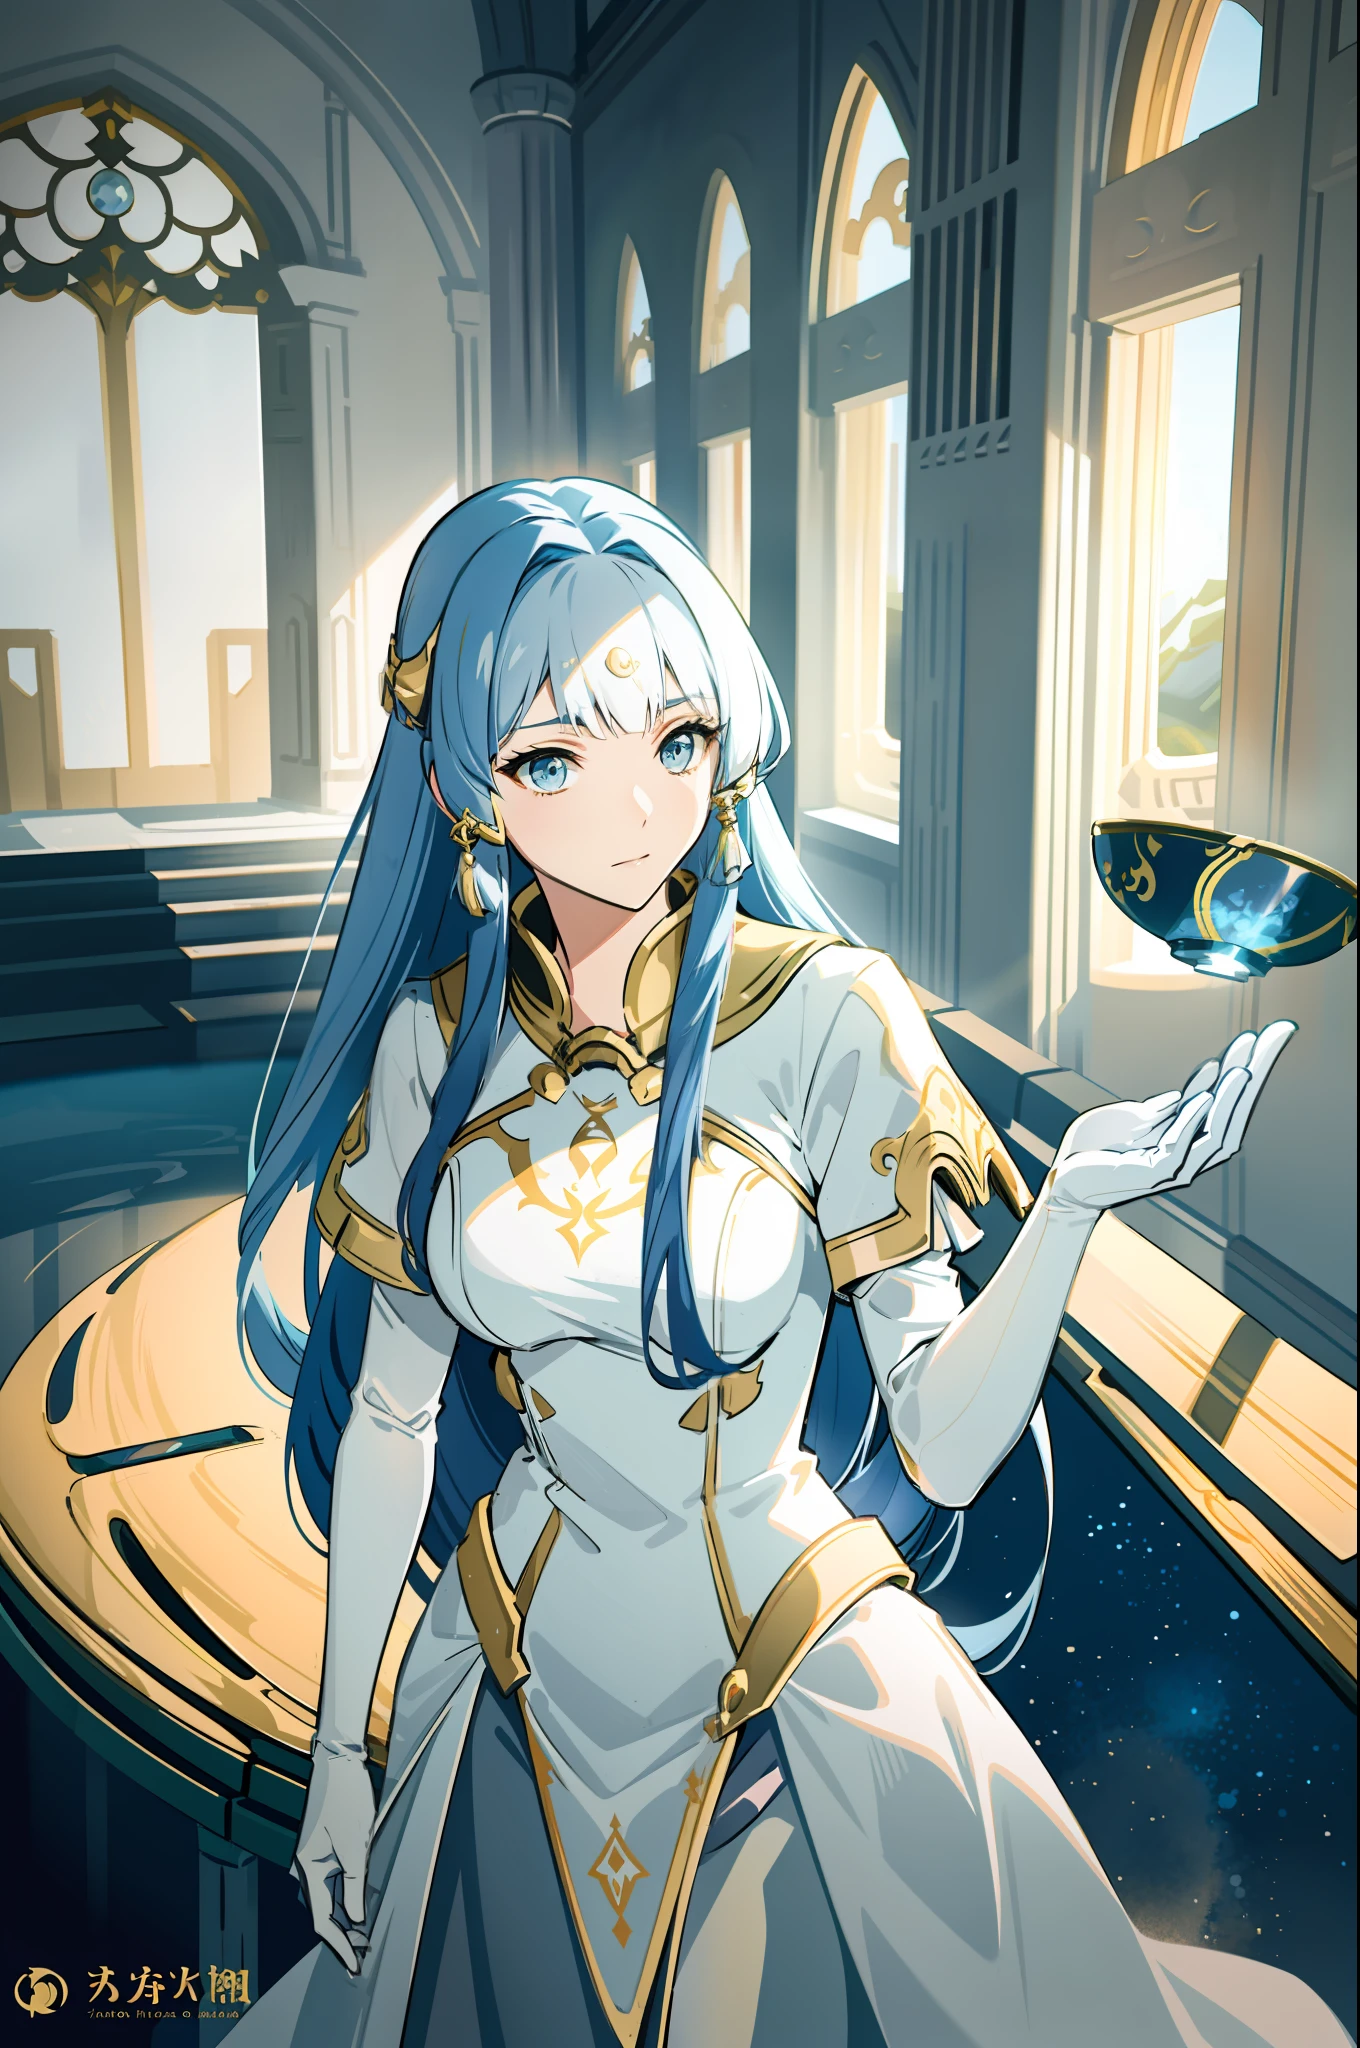 ((Ayaka)), a stunningly beautiful woman with long, flowing blue hair, radiates grace and elegance as she stands before me. Her delicate long white dress is adorned with beautiful gold trimmings that accentuate the curves of her (cleavage:0.3). The scene is set in the interior of a spaceship, filled with awe-inspiring technology and the quiet hum of deep space.